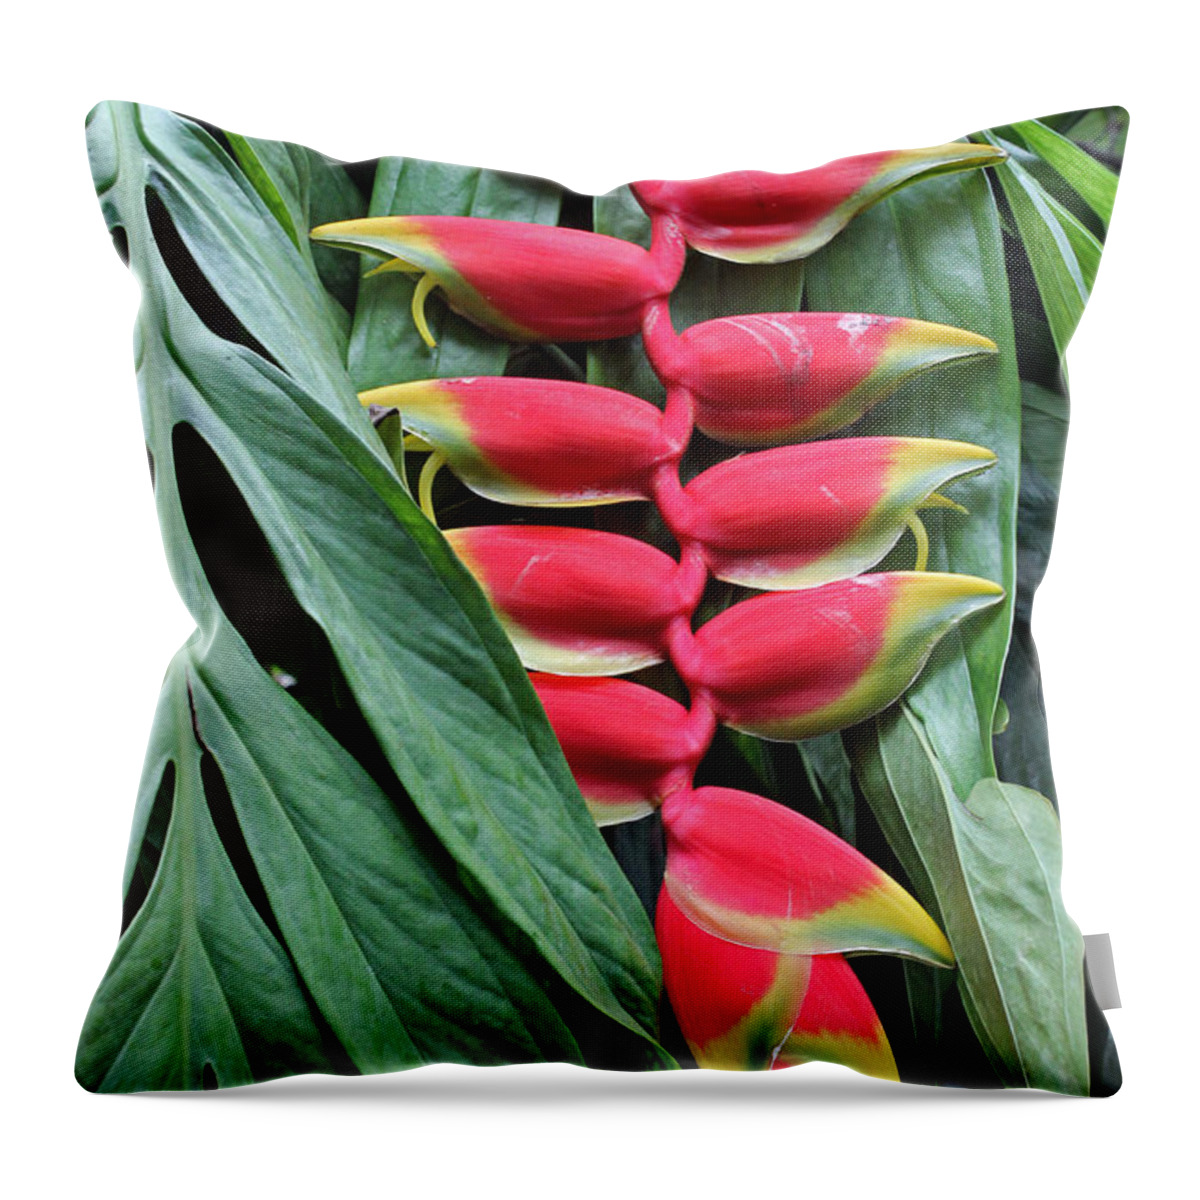 Lobster Claw Throw Pillow featuring the photograph Lobster Claw by Tony Murtagh